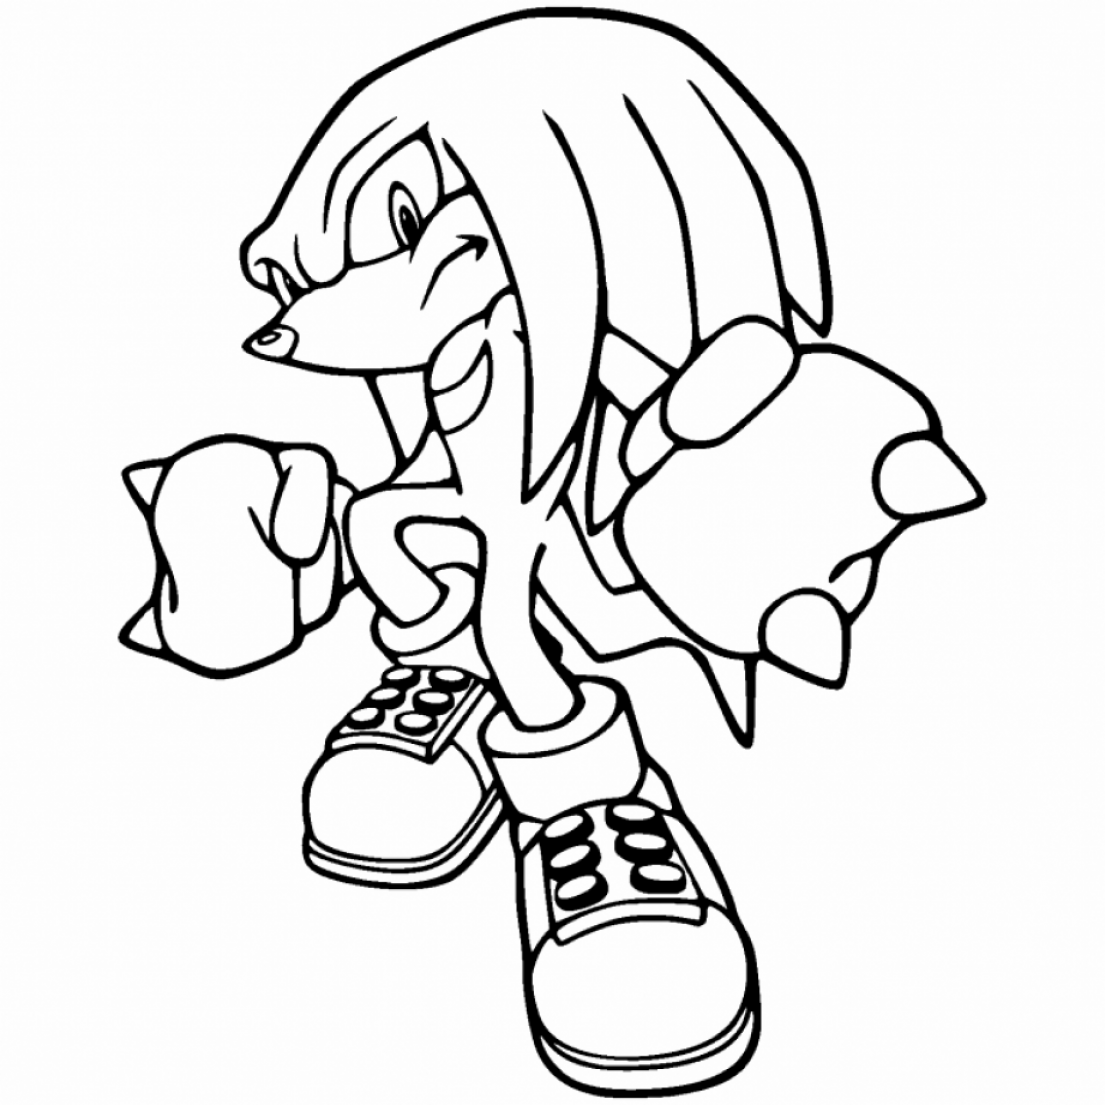 Knuckles the Echidna coloring pages for kids - SheetalColor.com